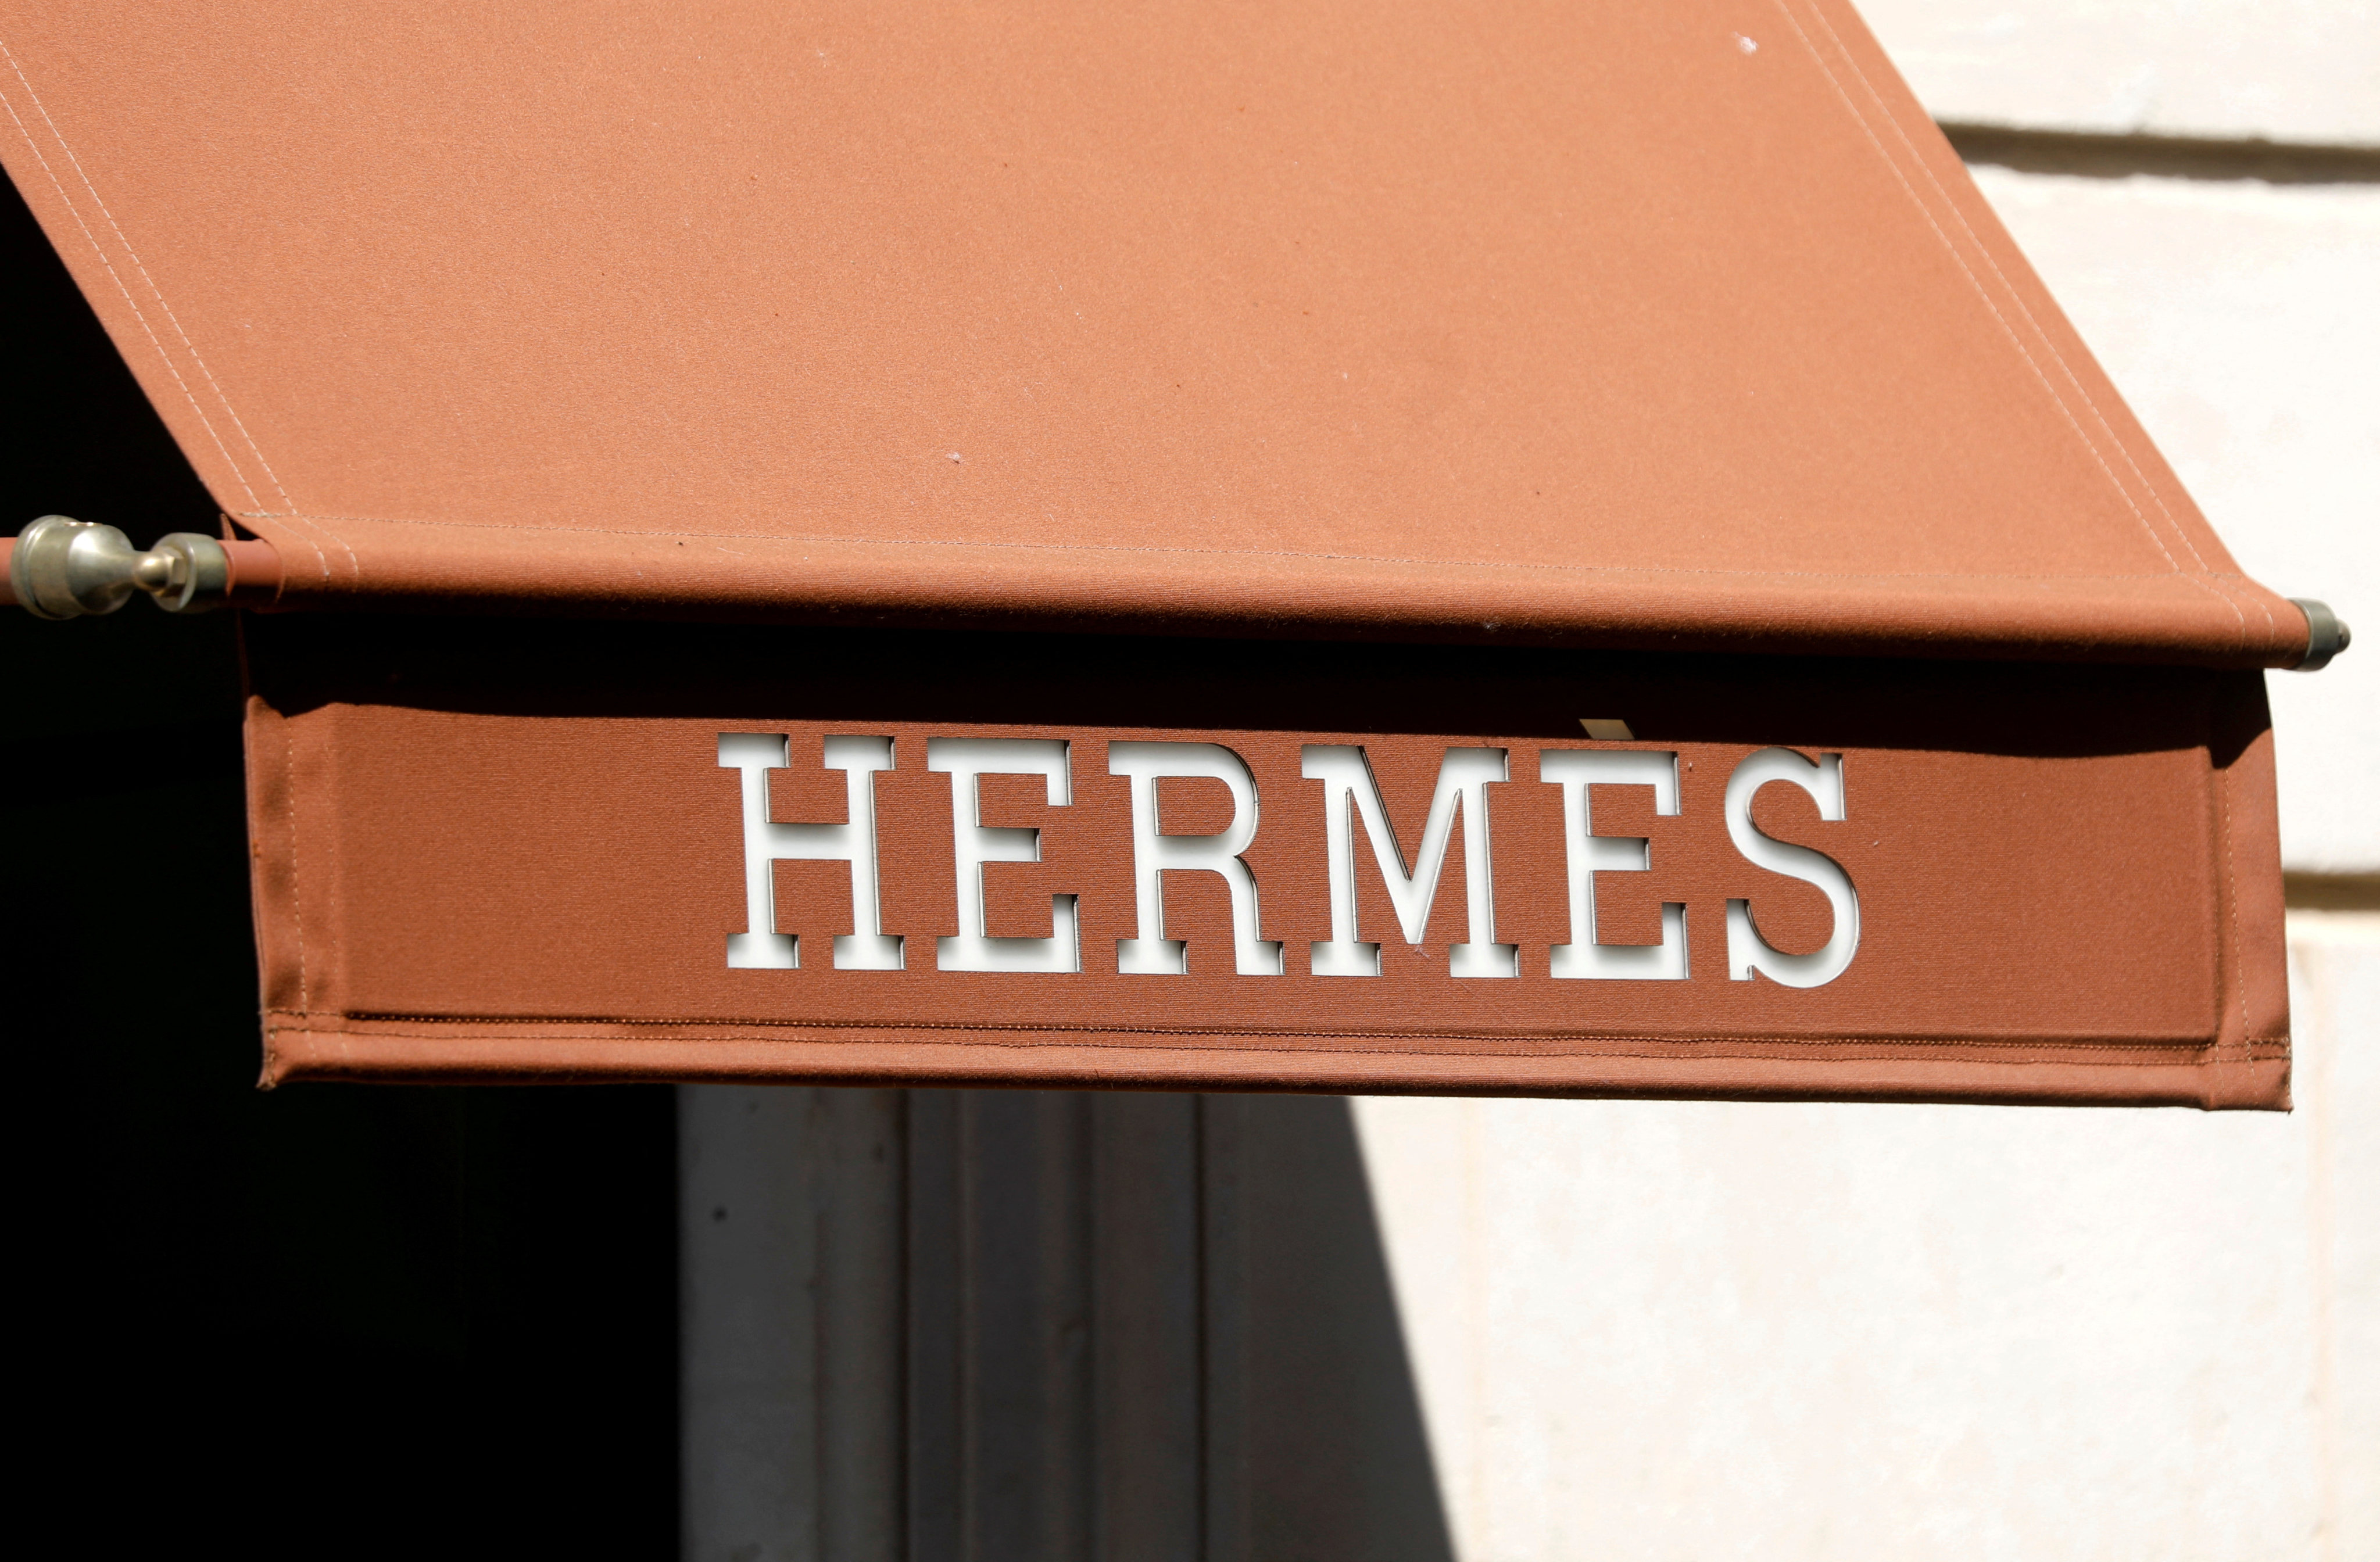 Unlike some of its competitors, Hermès came out against the second-hand luxury fashion market in a statement. Photo: Reuters